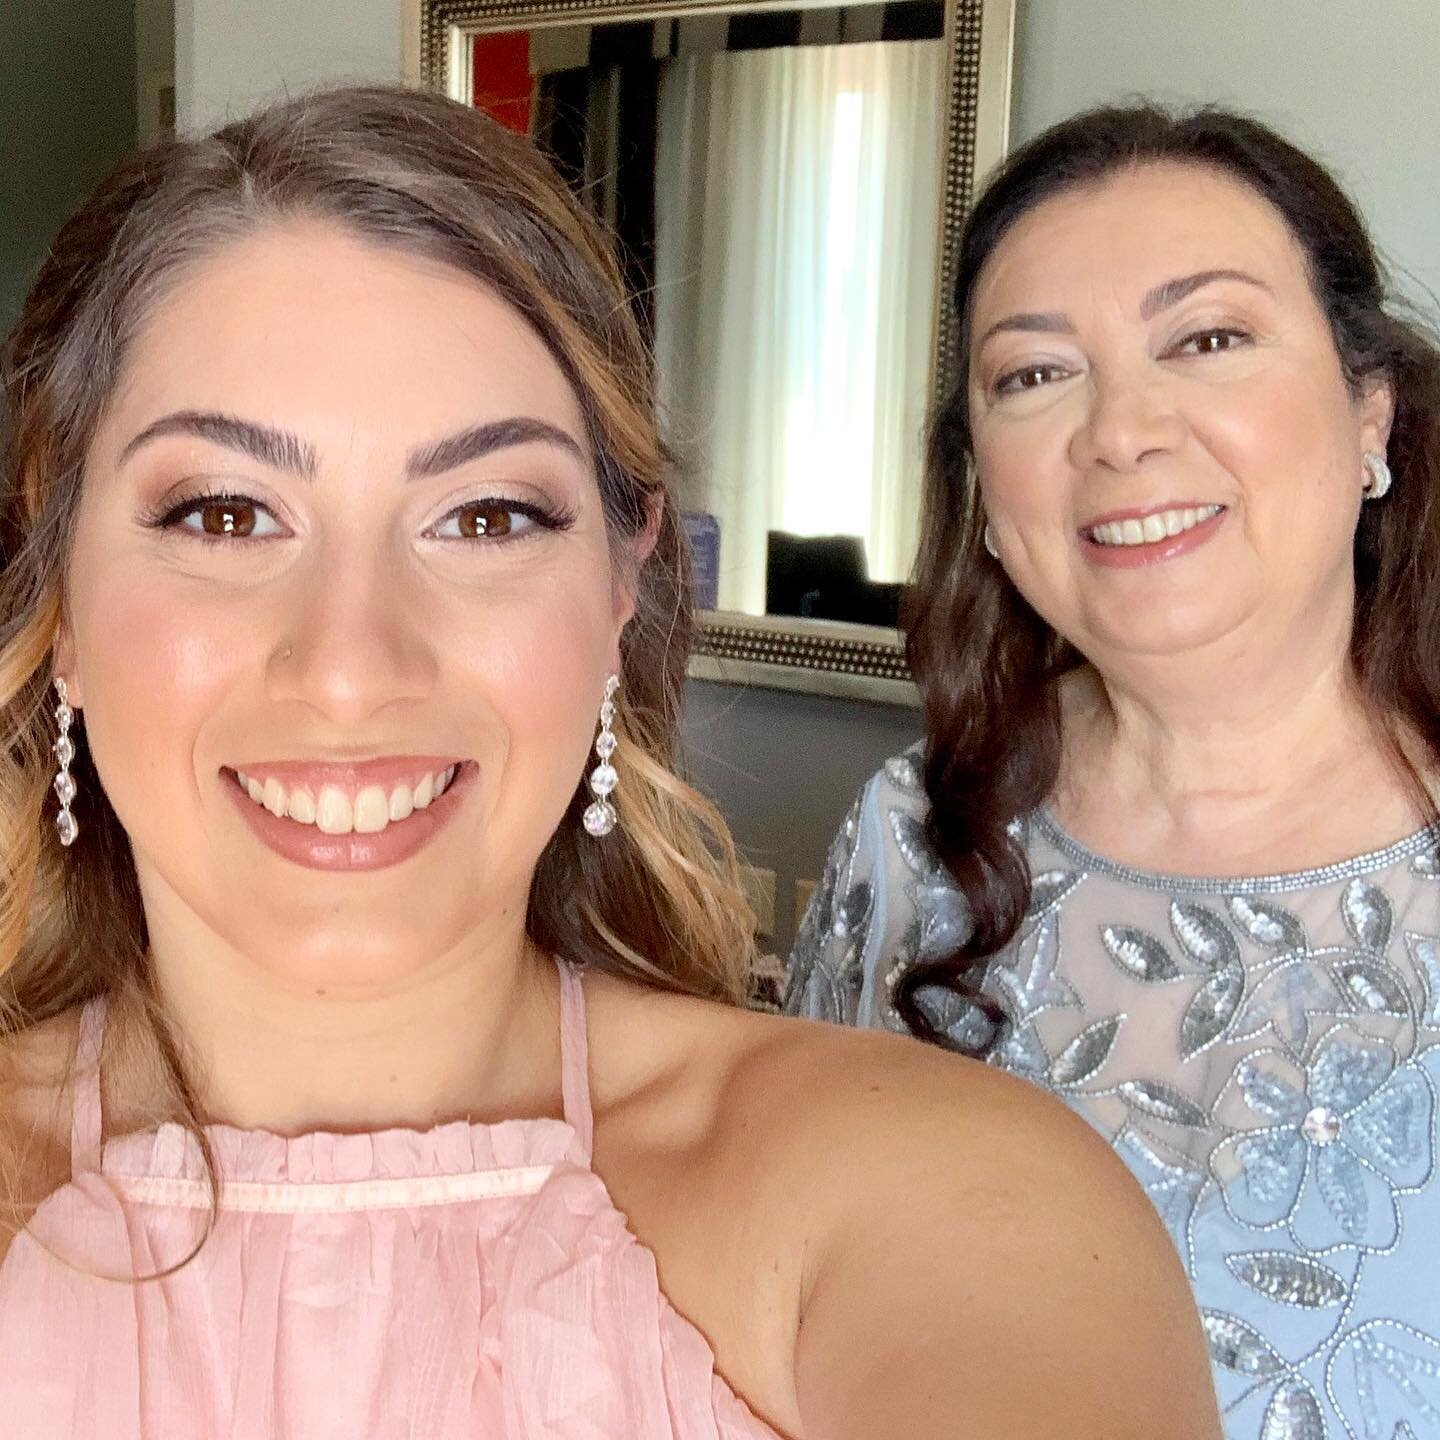 client selfies hit different when it&rsquo;s your best friend and her momma! 🤍 felt so special to help these beautiful ladies get wedding ready. Swipe to the end to see what an MUA looks like at the end of a work day 🥸 
.
.
.
#leesburgwedding #virg